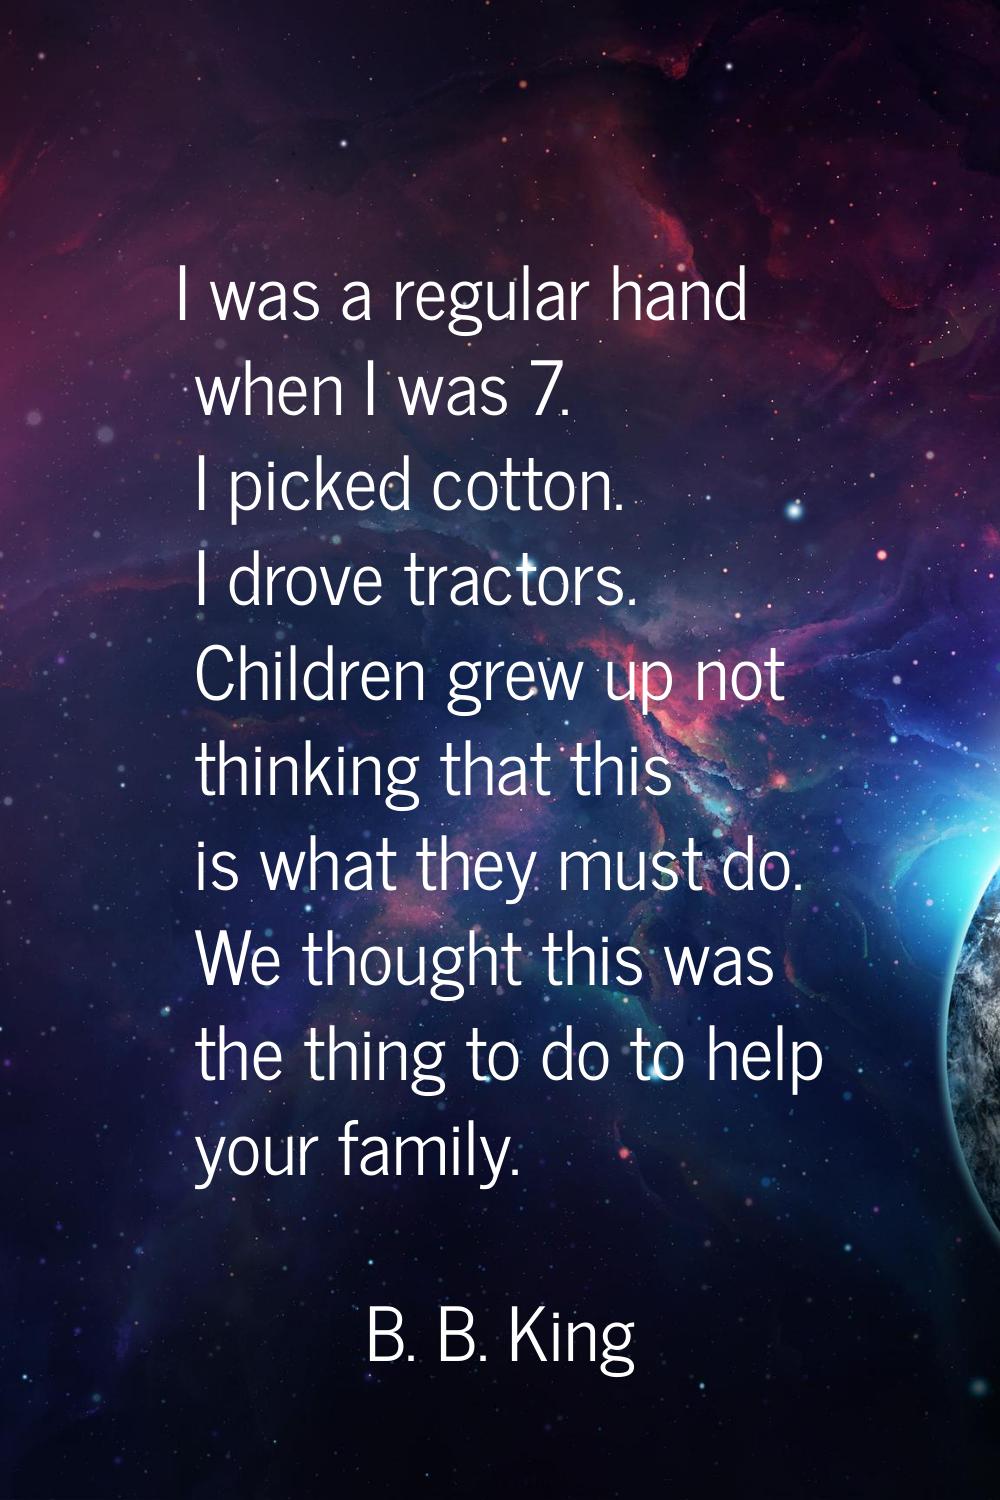 I was a regular hand when I was 7. I picked cotton. I drove tractors. Children grew up not thinking